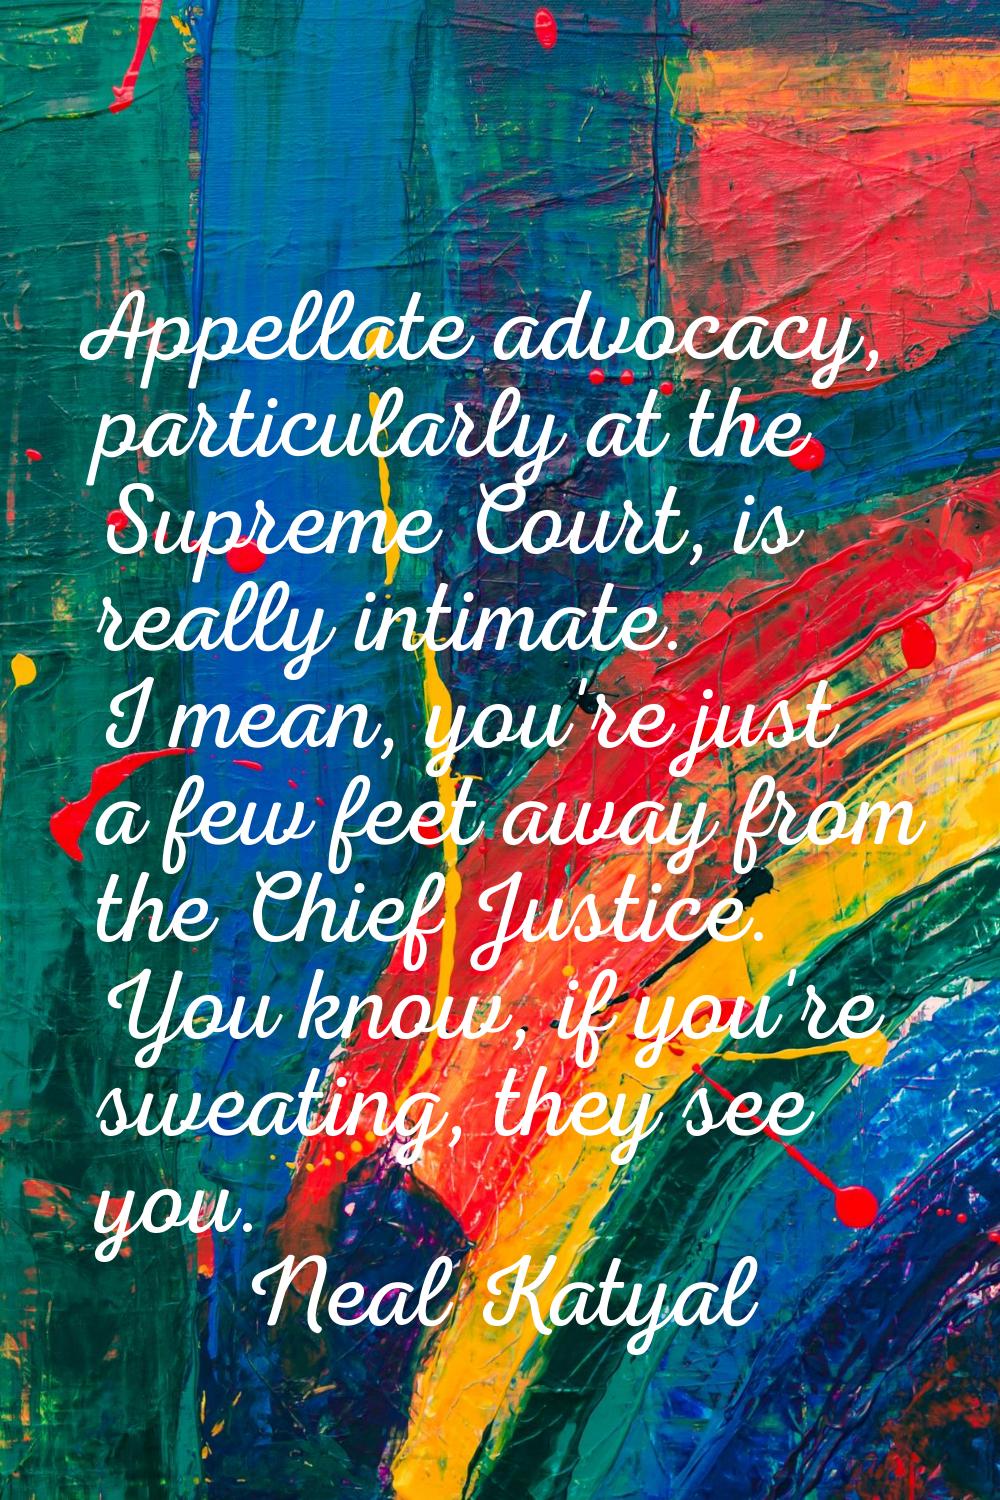 Appellate advocacy, particularly at the Supreme Court, is really intimate. I mean, you're just a fe